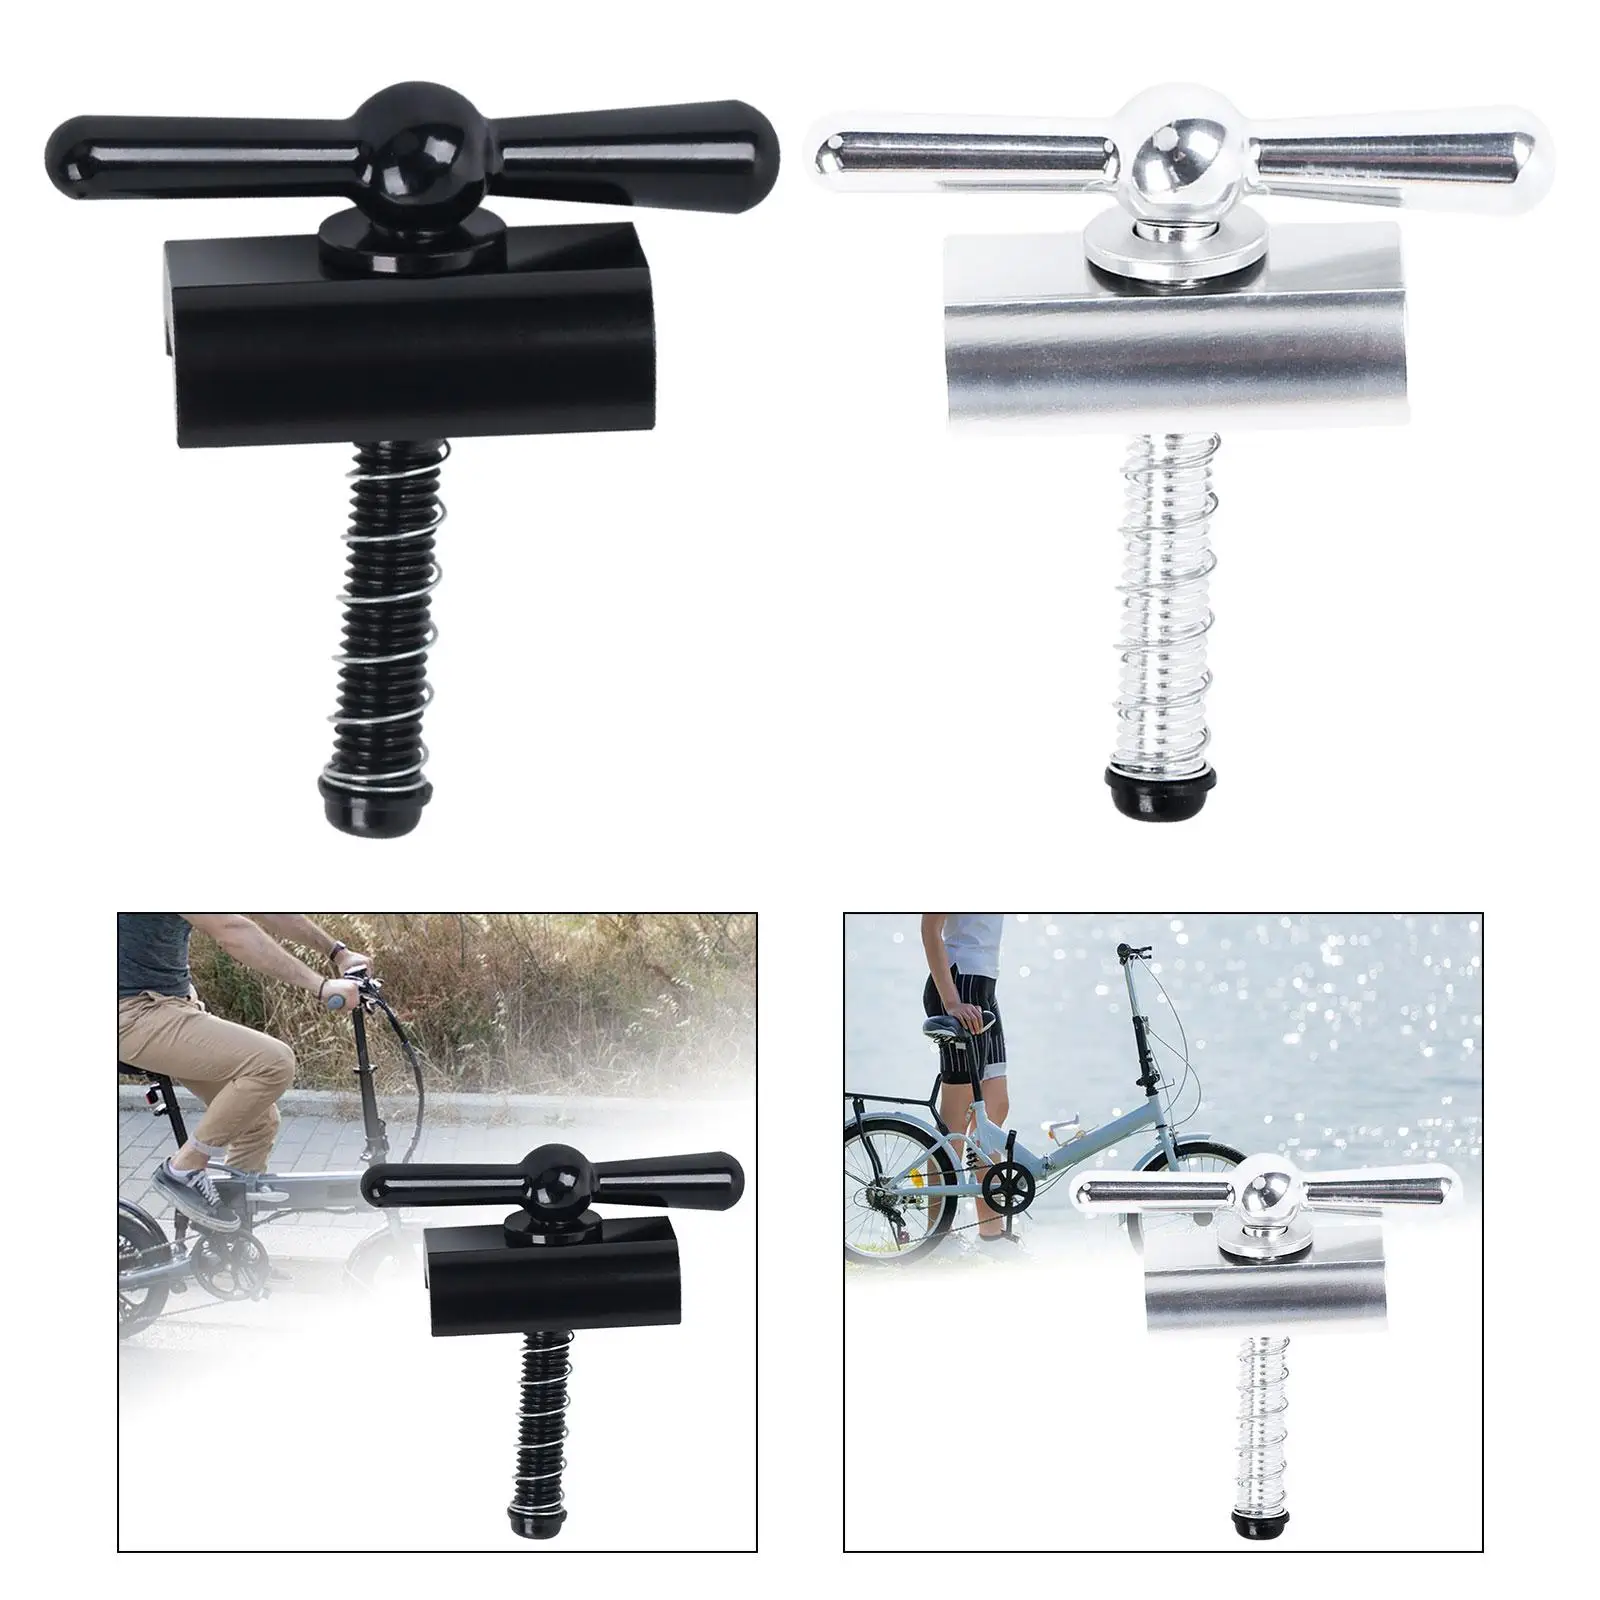 Folding Bike Hinge Clamp Lightweight High Strength CNC Hinge Clamp Plate Foldable Bicycle Accessories for Headset Replacement